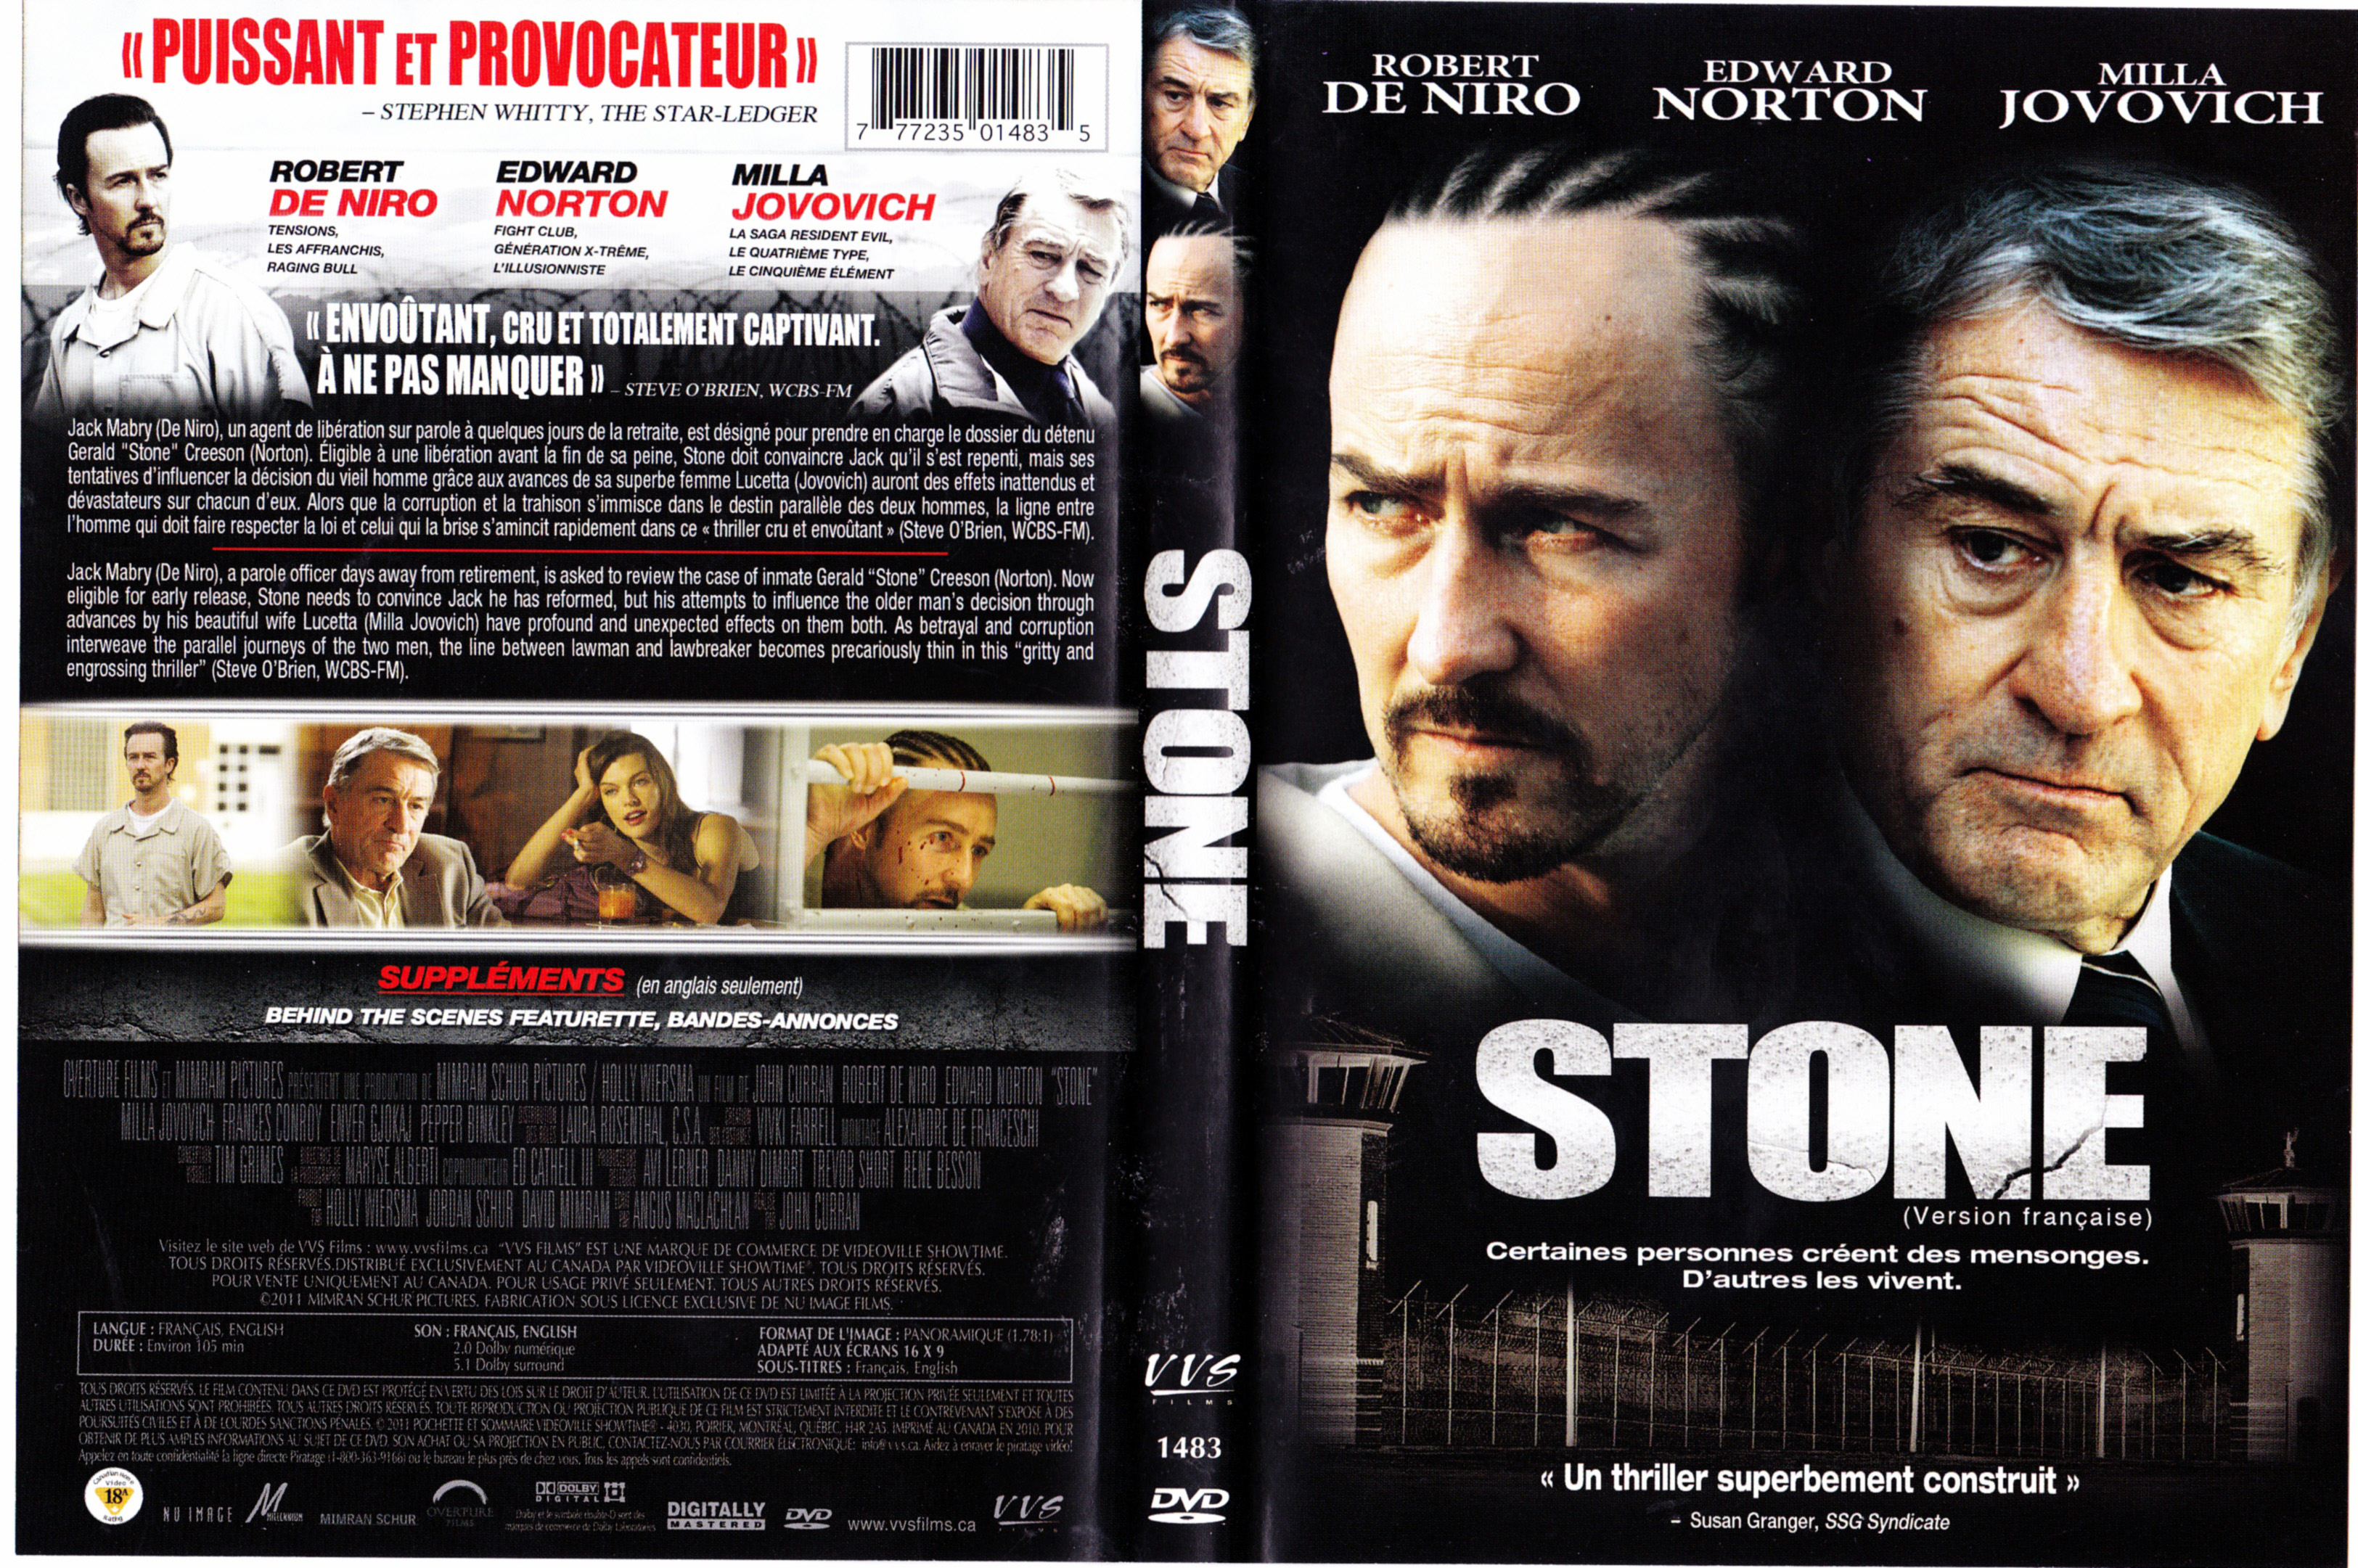 Jaquette DVD Stone (Canadienne)